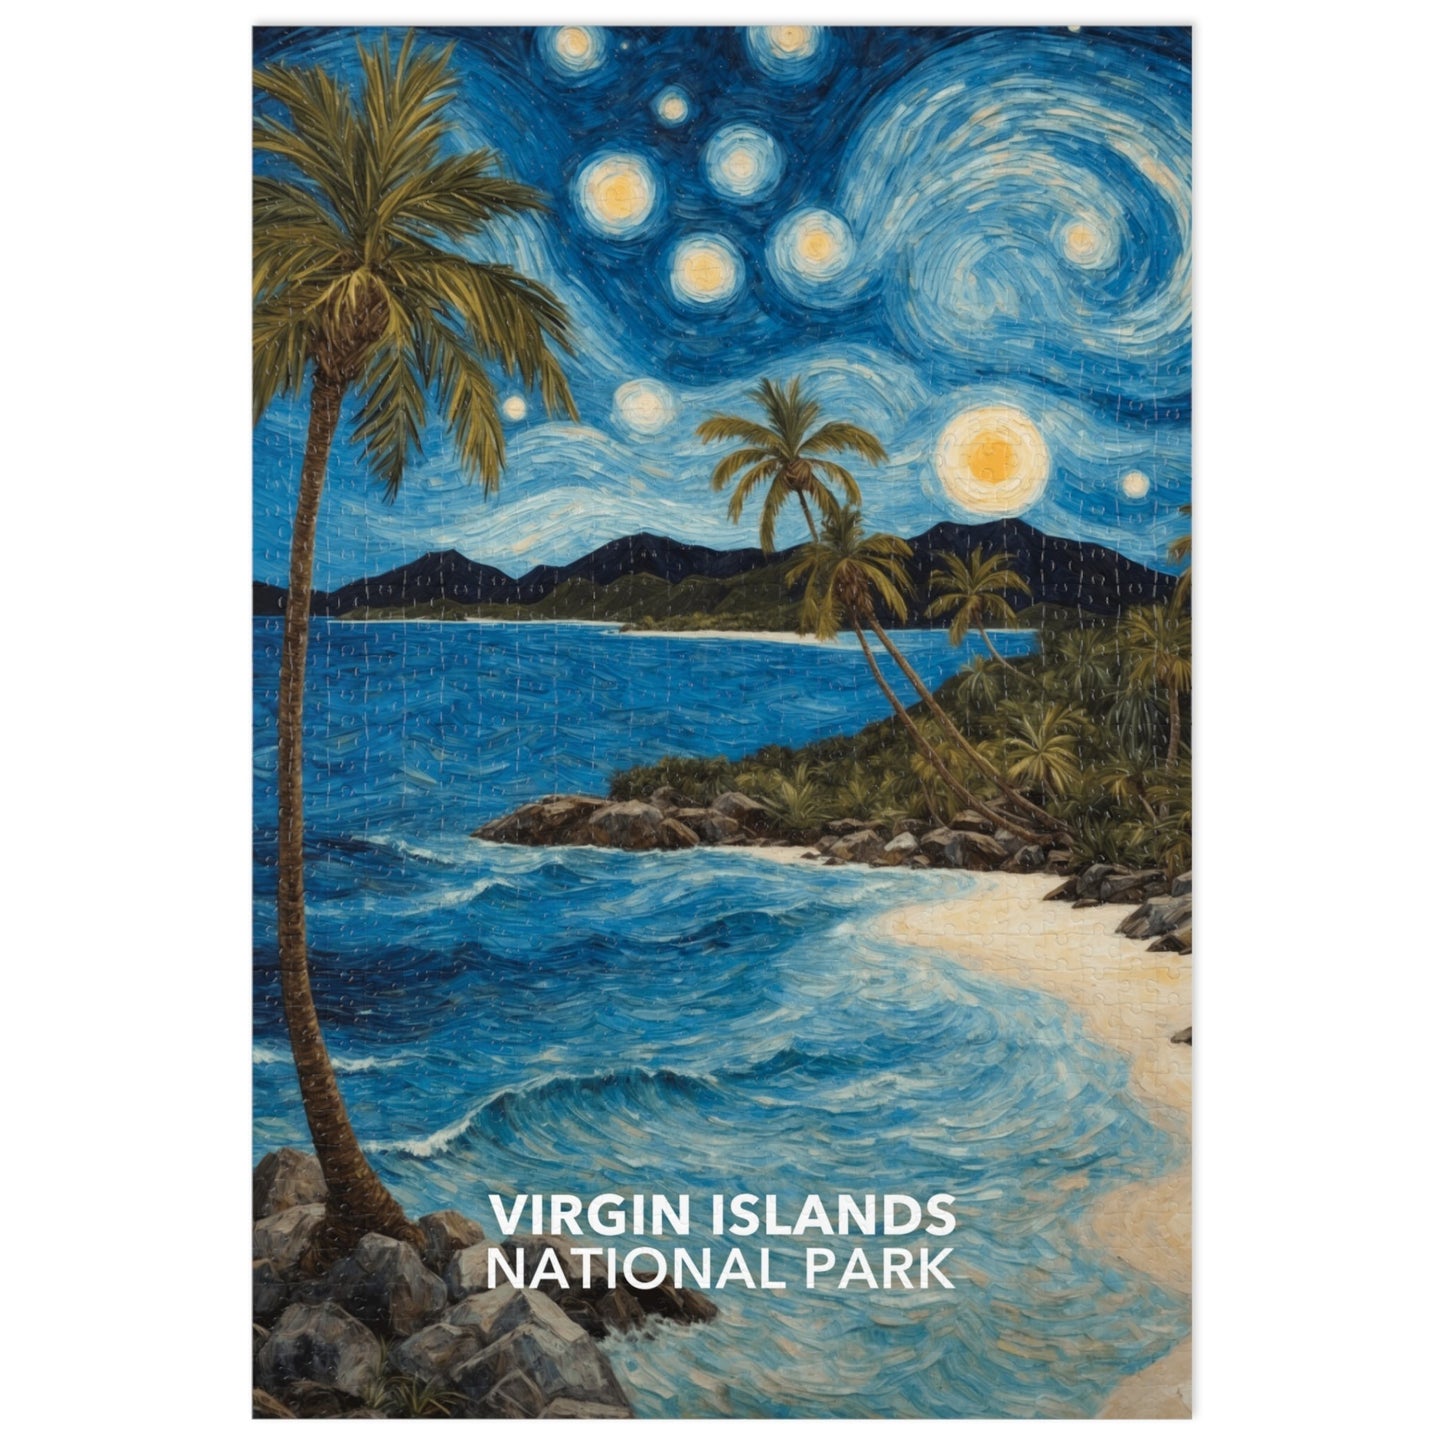 Virgin Islands National Park Jigsaw Puzzle - The Starry Night